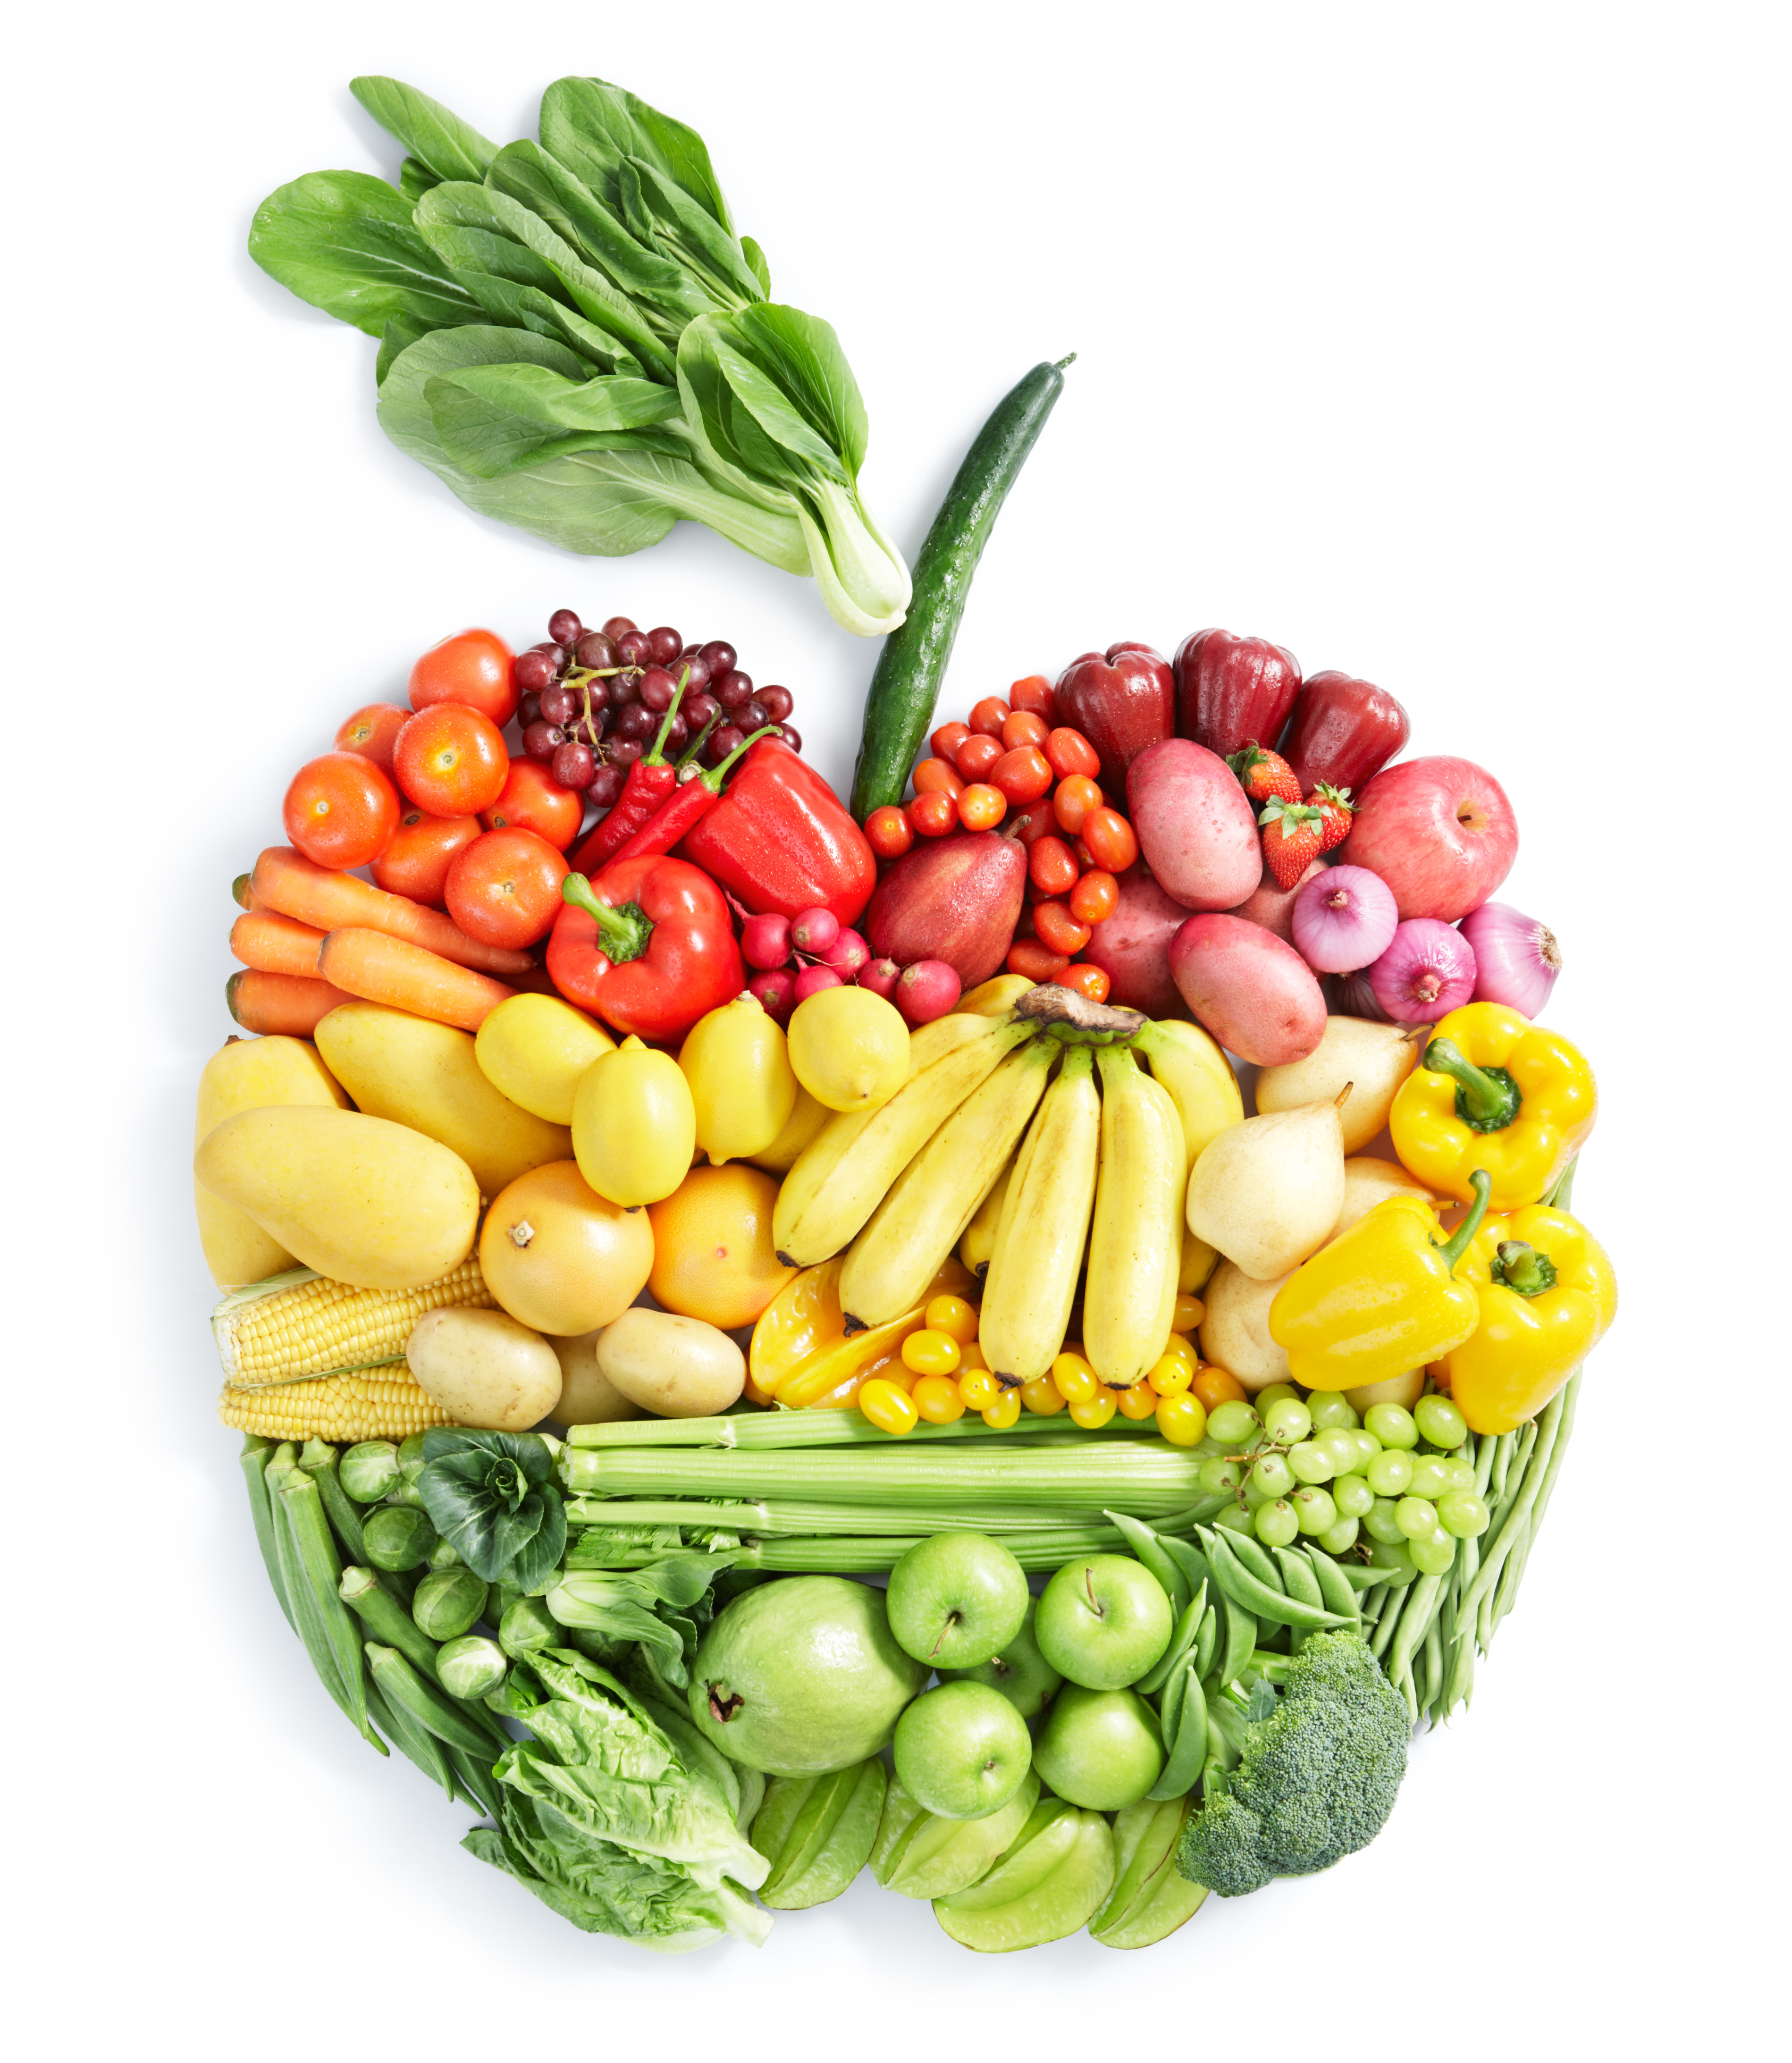 Proper, healthy eating reduces inflammation, and clears blockages and other body disturbances.